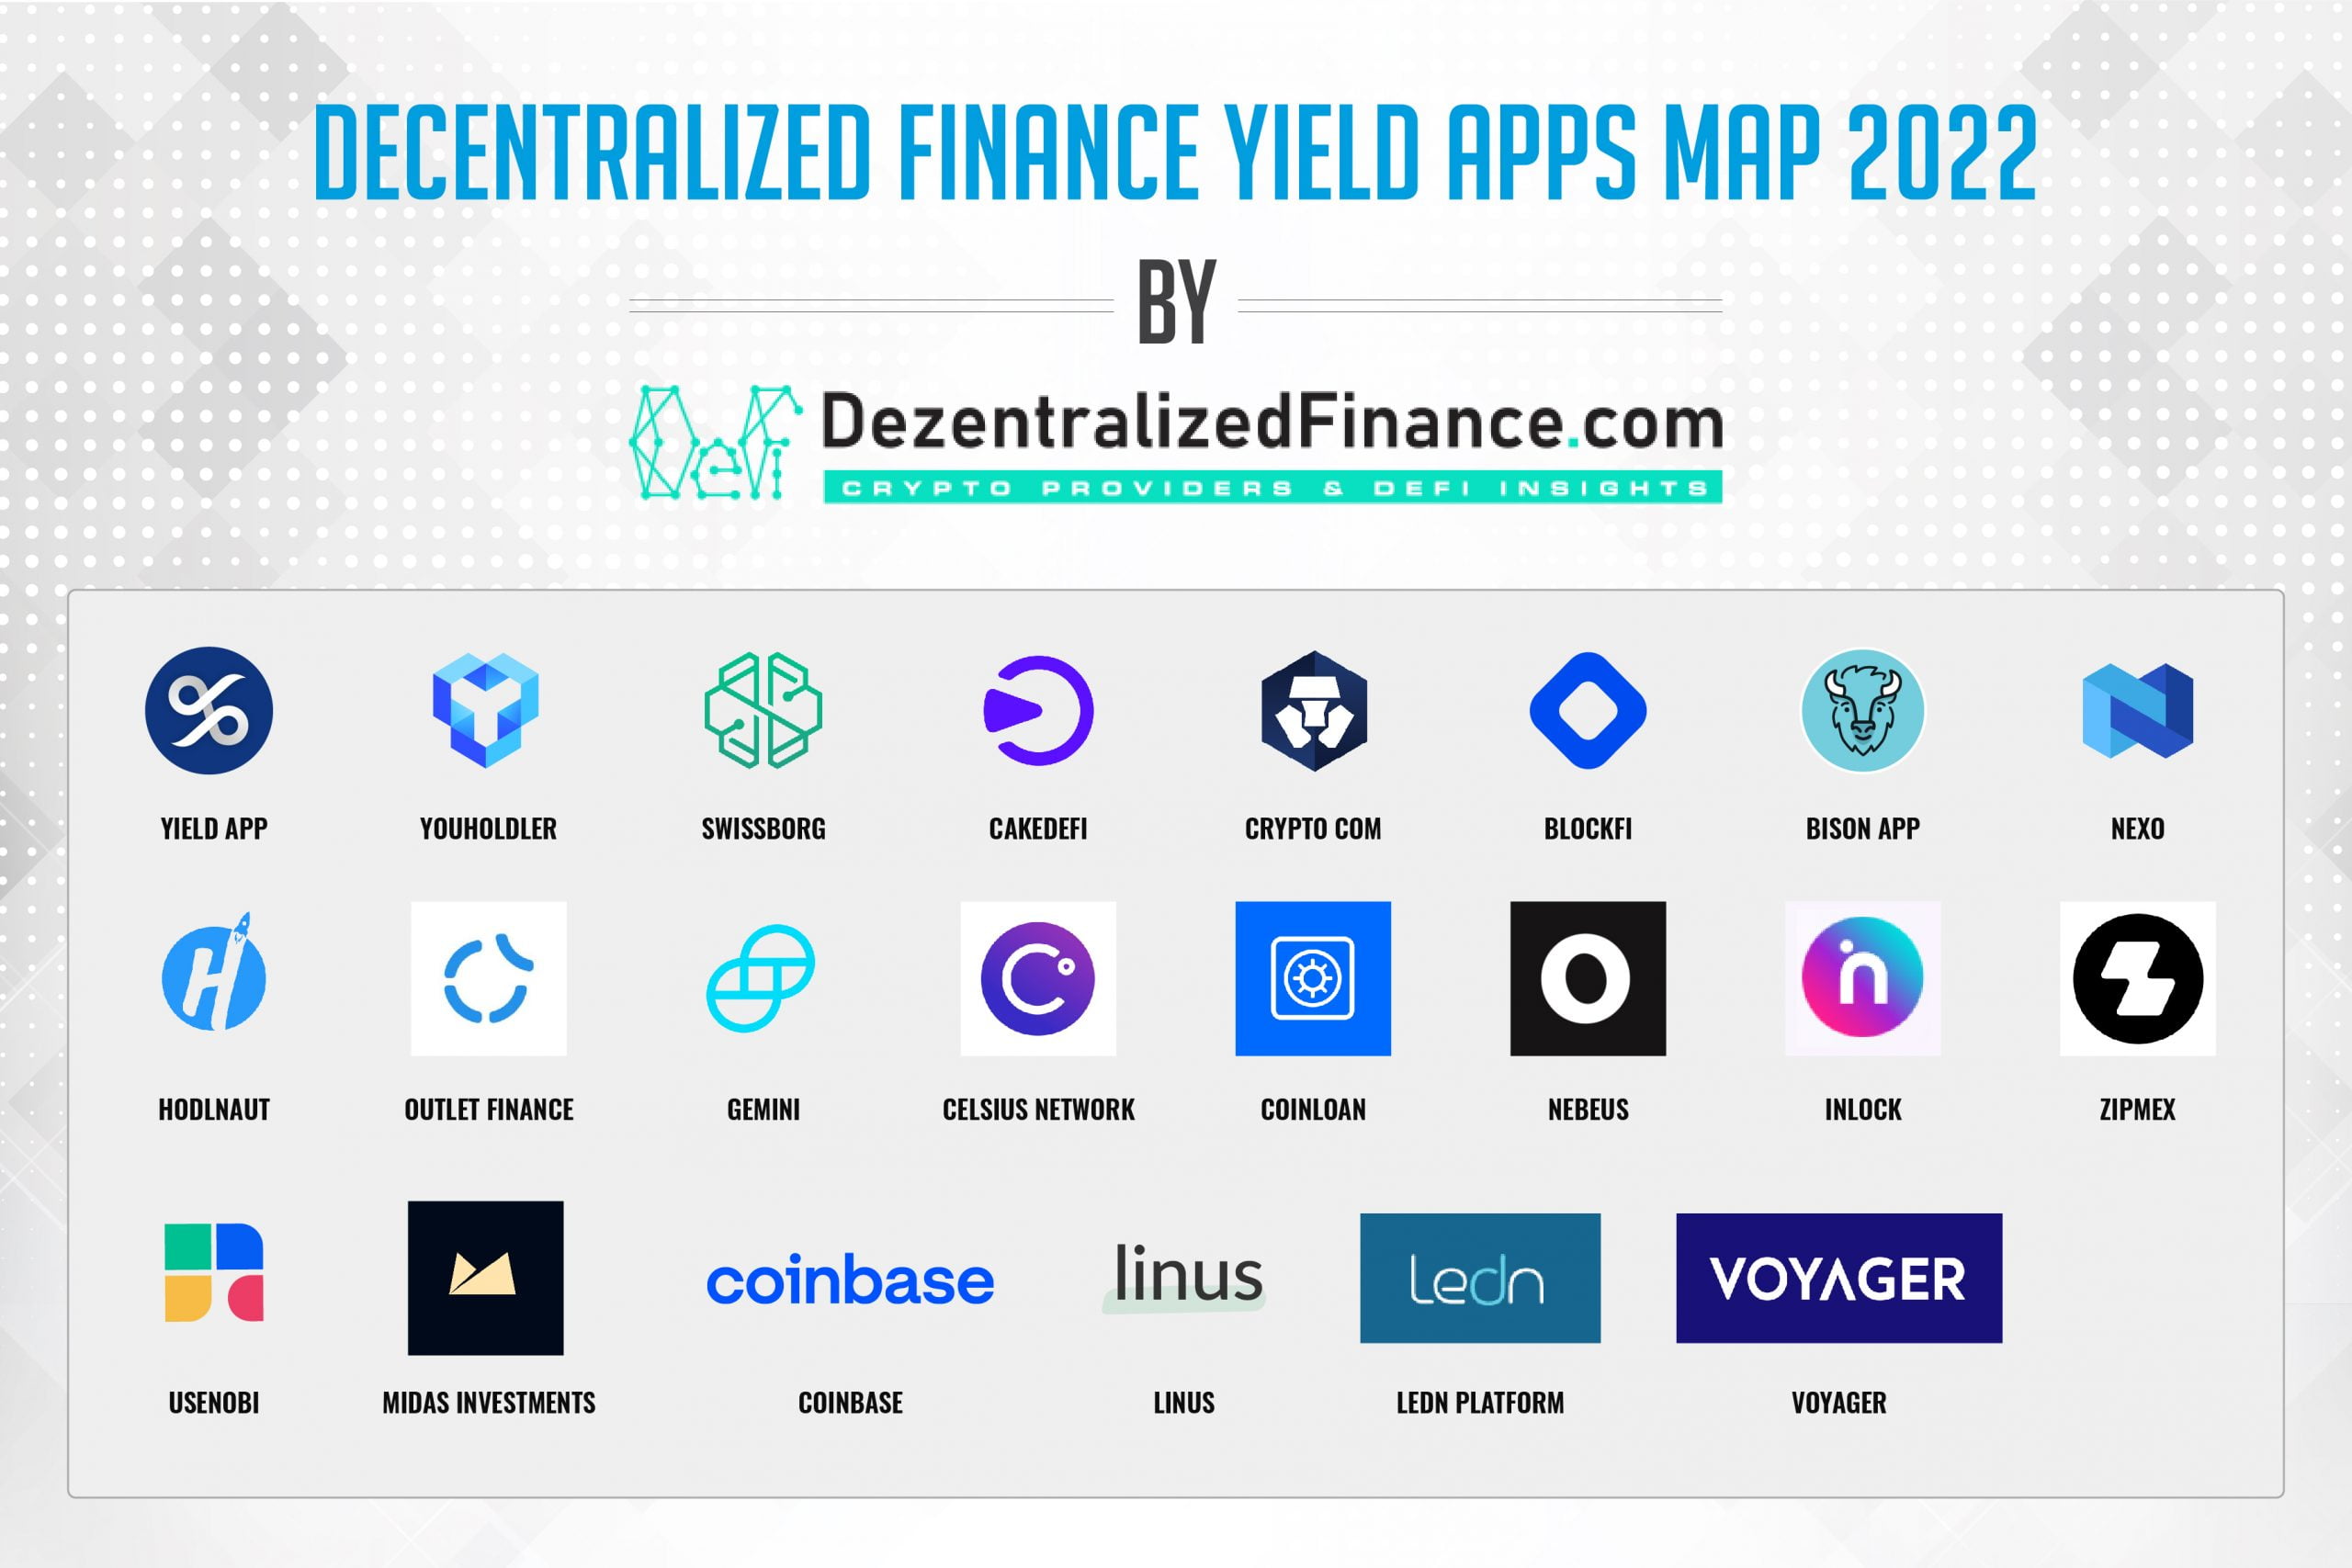 defi yield apps scaled